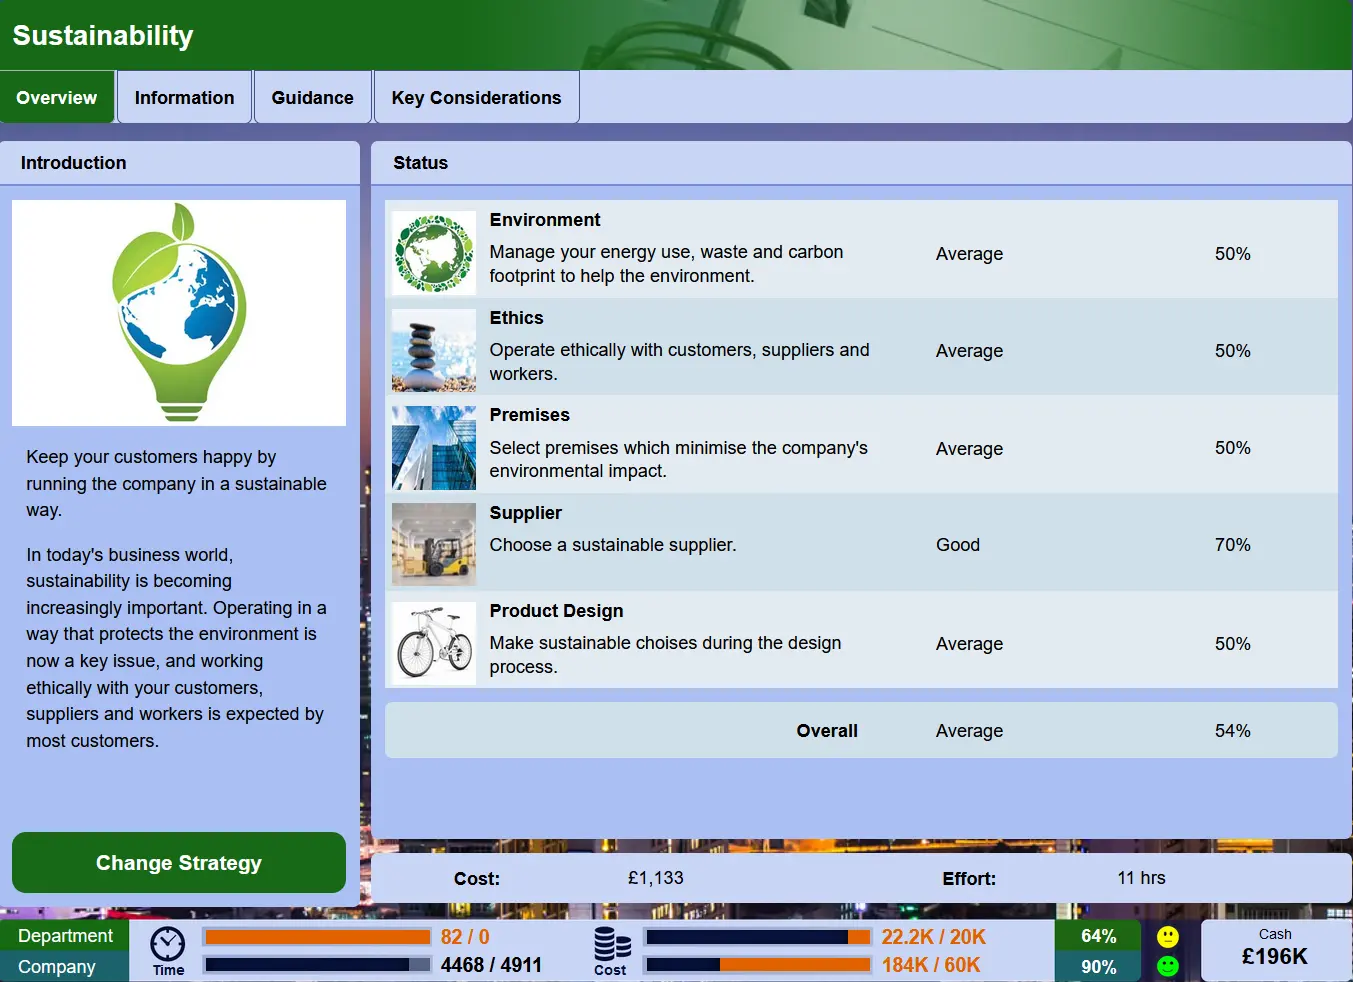 New sustainability features have been added to the online business simulation